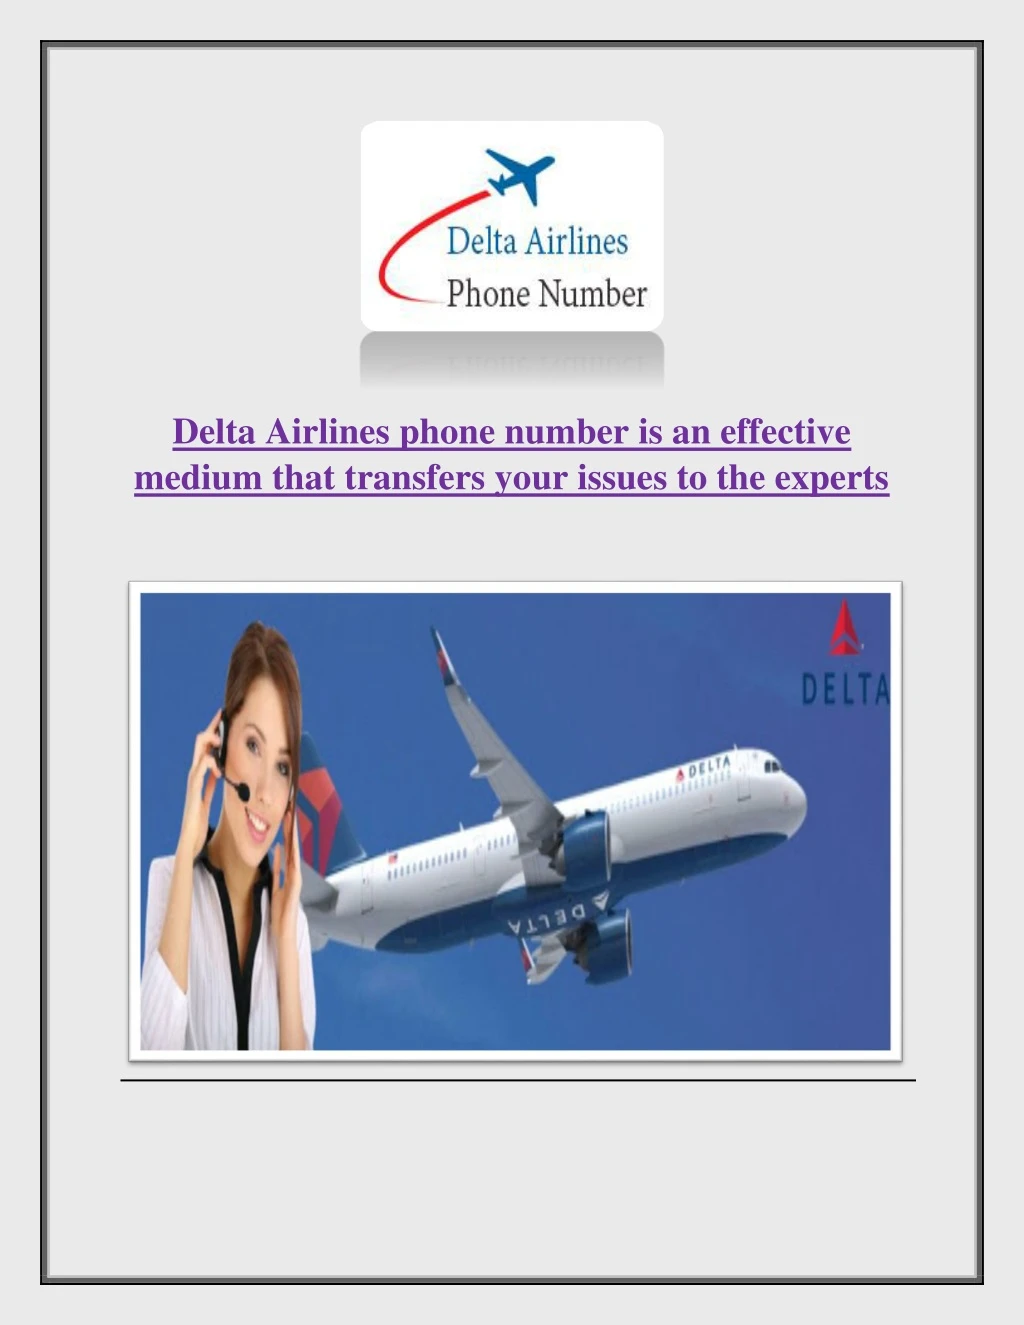 delta airlines phone number is an effective